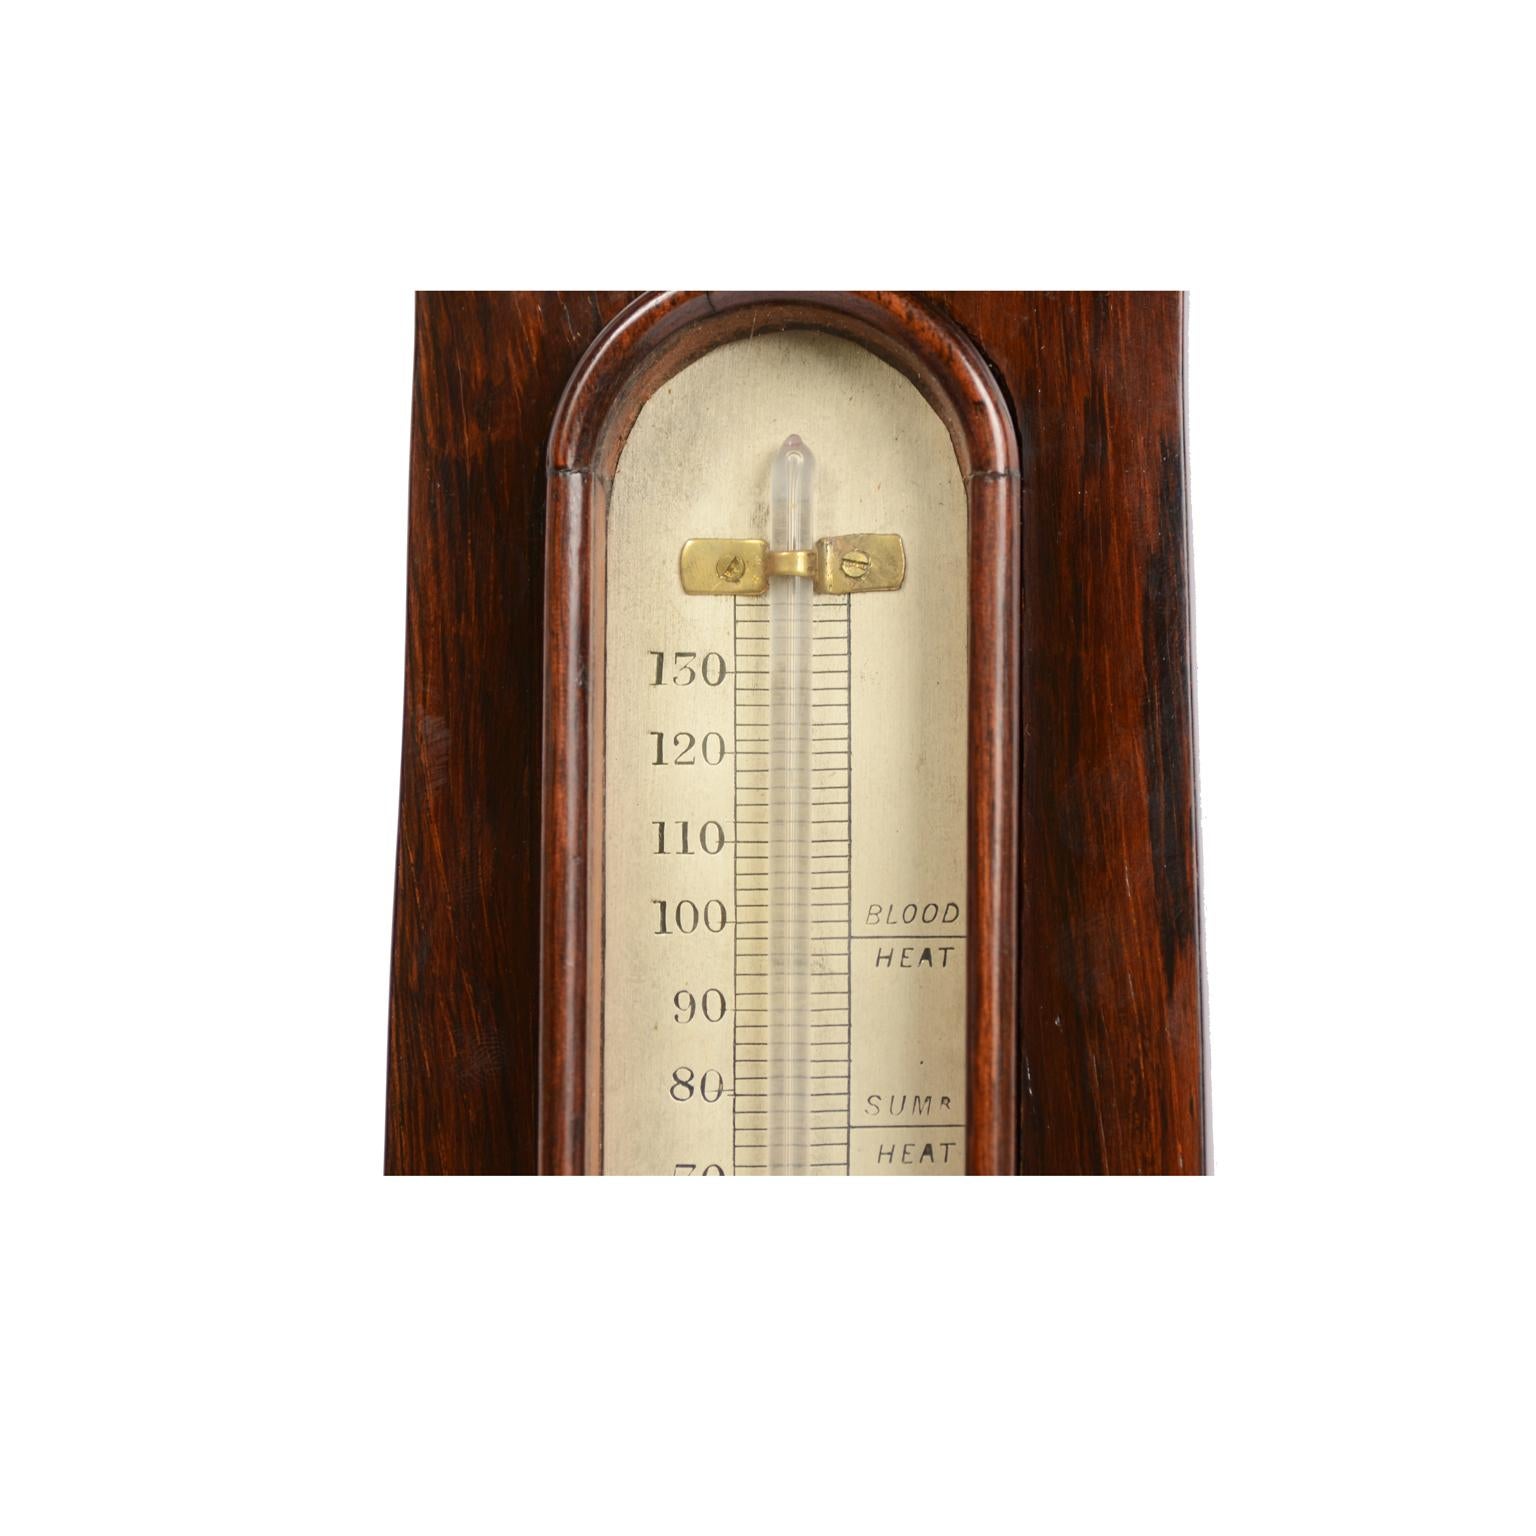 19th Century Wooden English Barometer Antique Forecast Weather Instrument For Sale 6